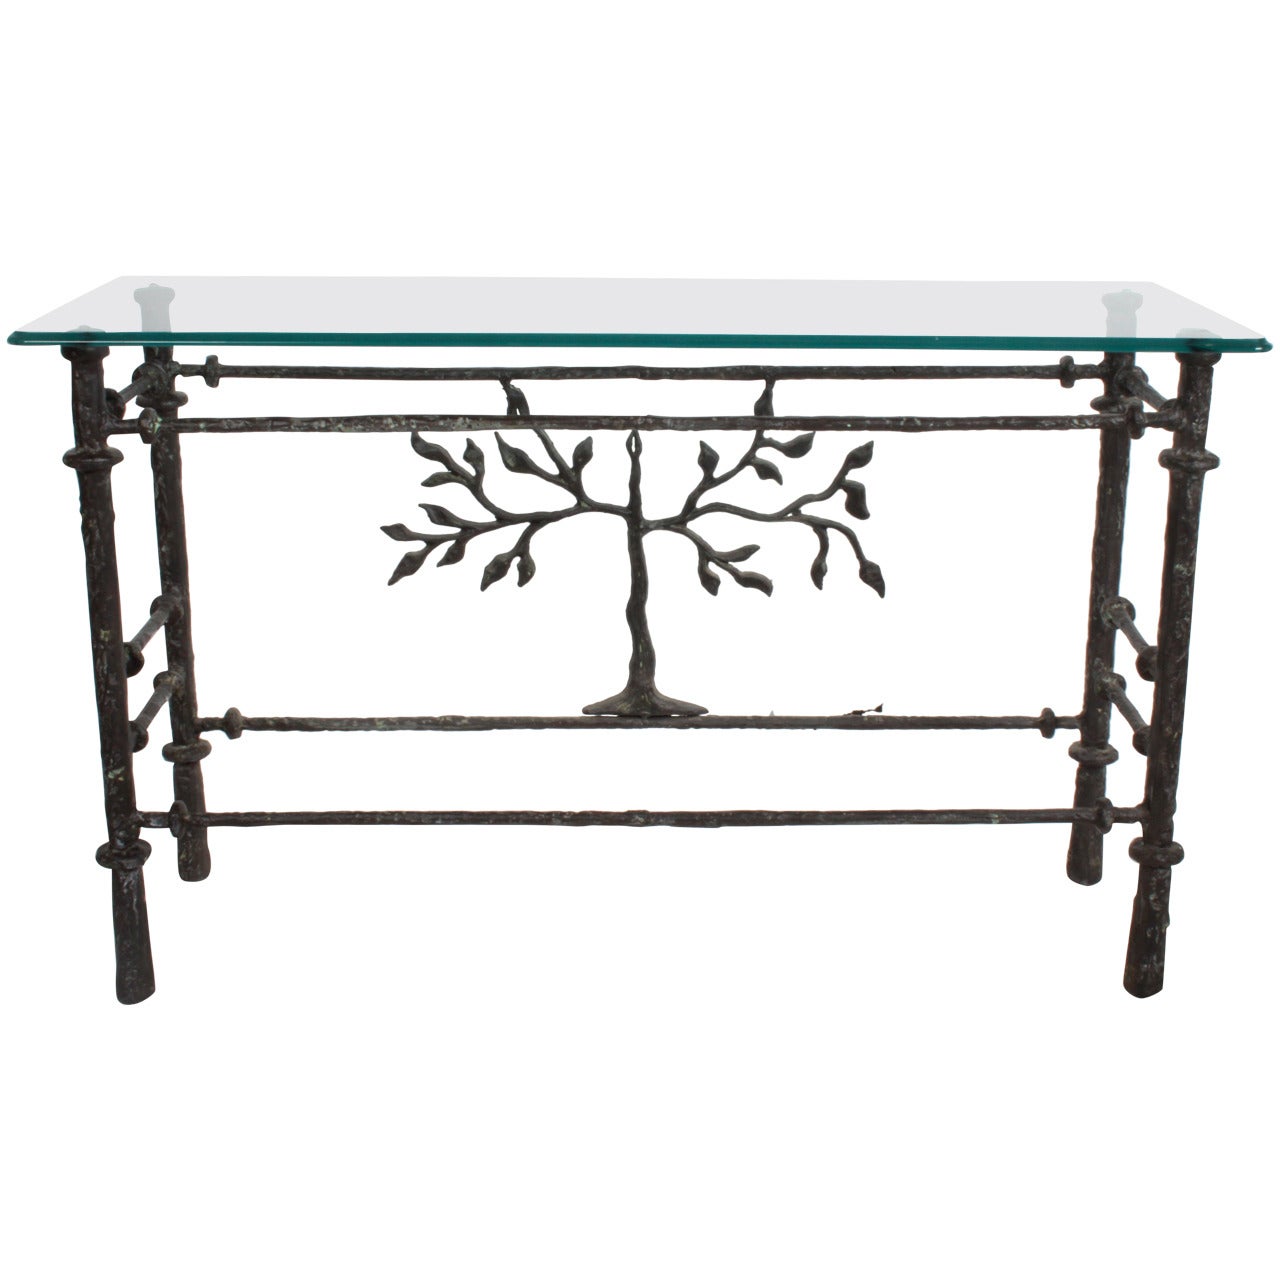 Giacometti style console table with glass top